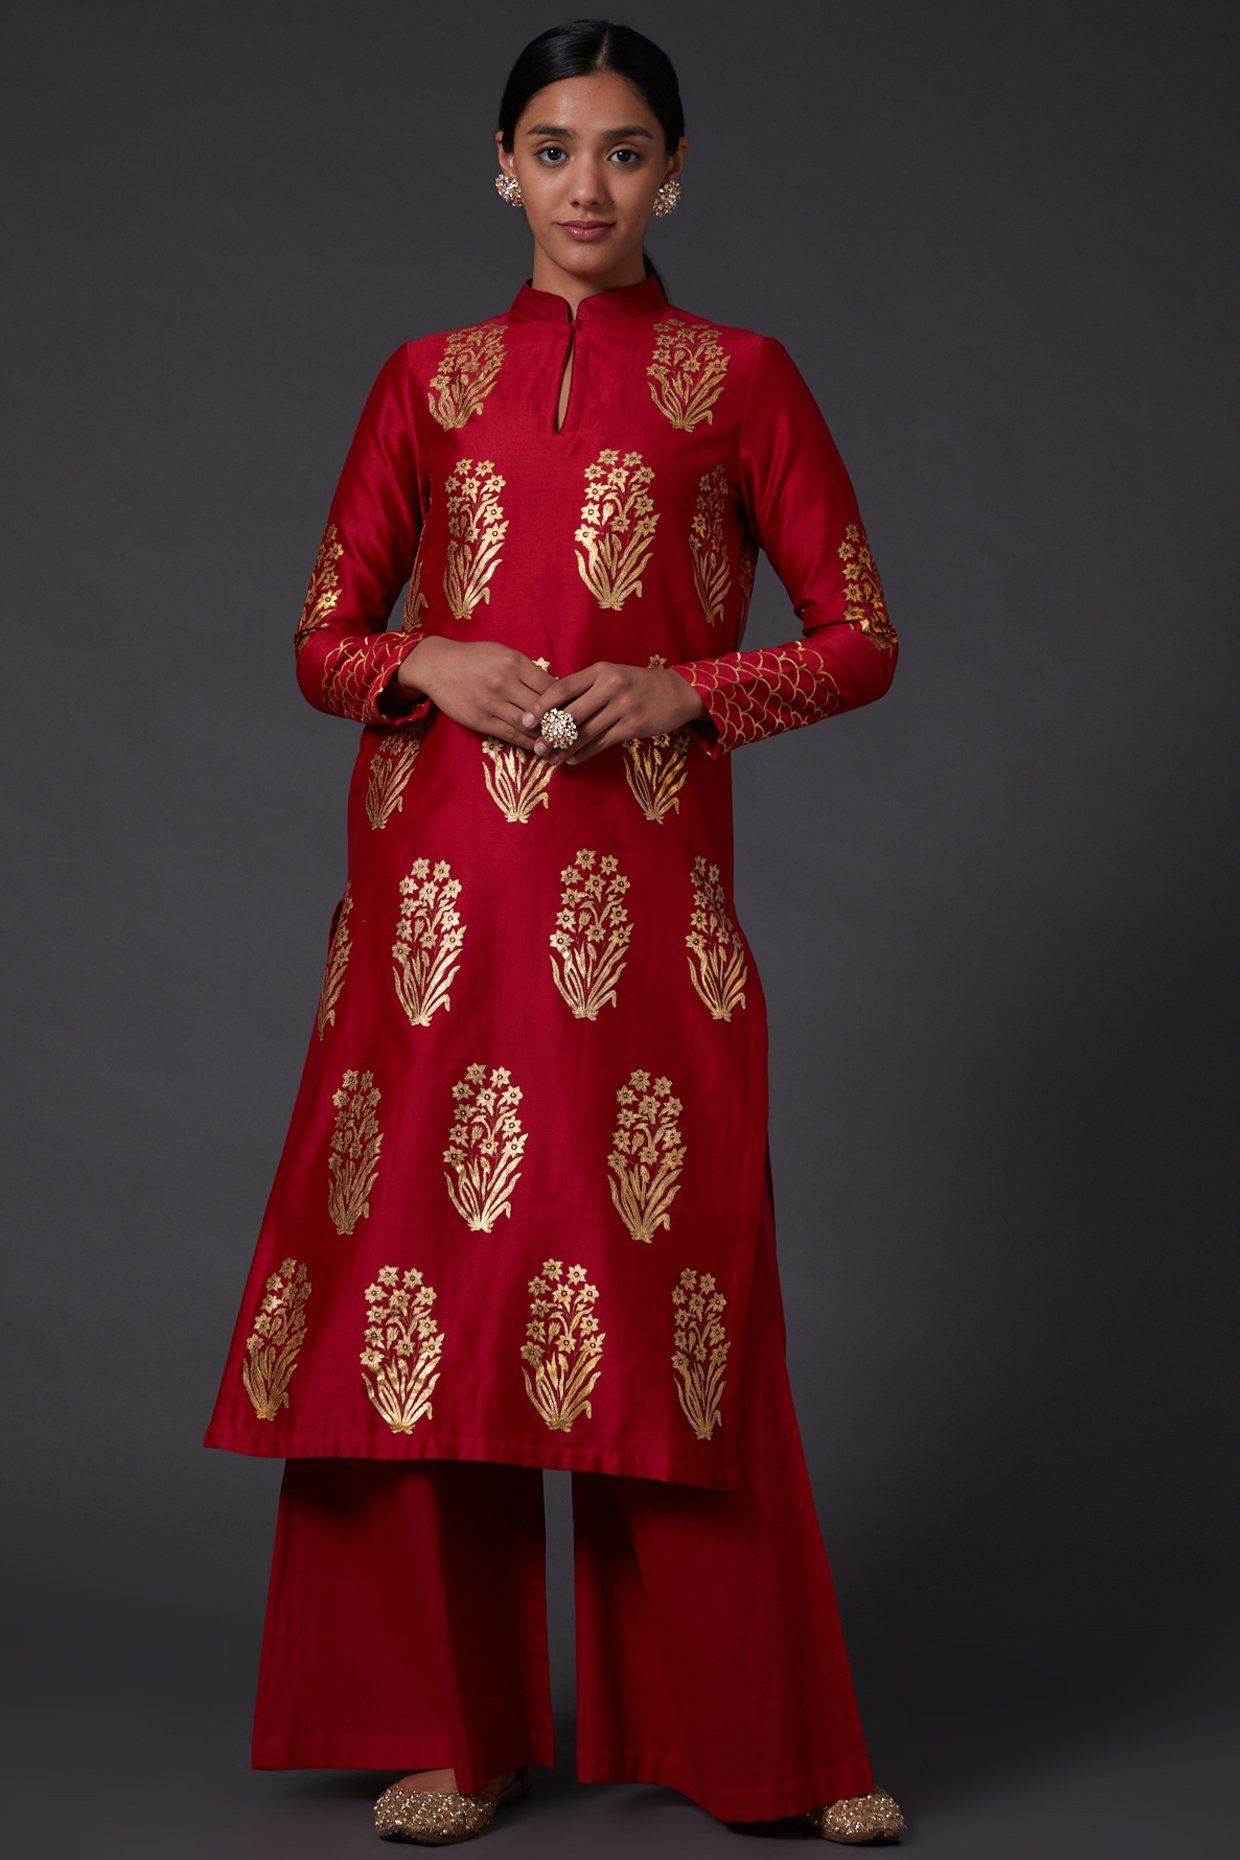 Buy FASHION CLOUD Women's Rayon Gold Printed Kurti and Pant Set. (Red,  X-Small) at Amazon.in